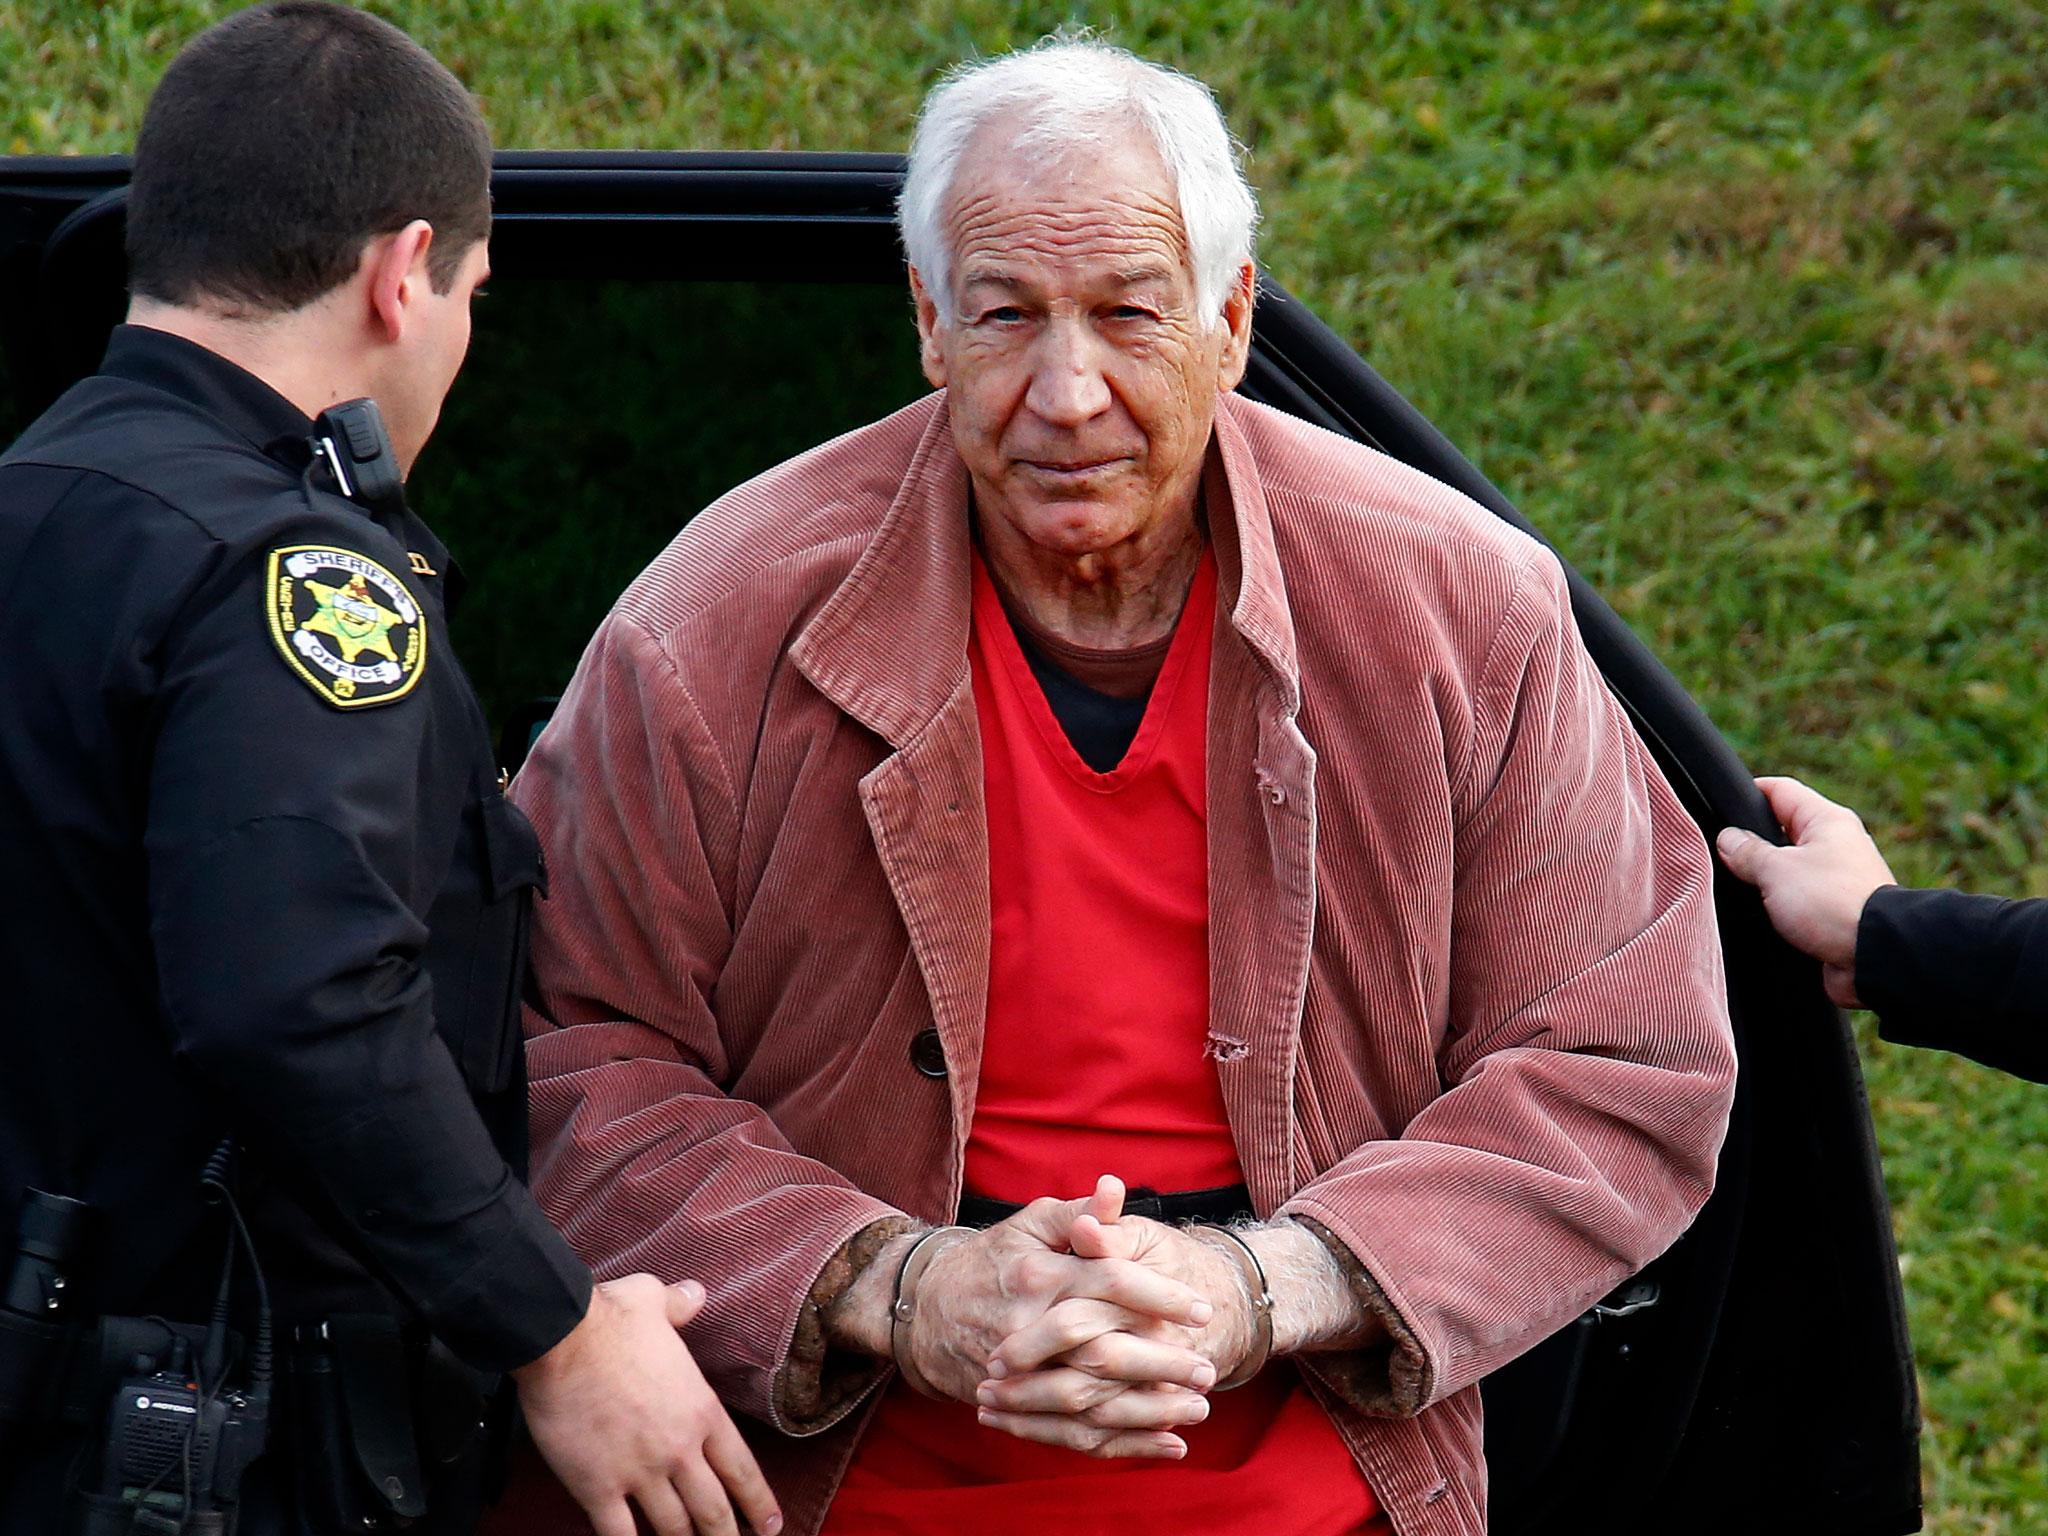 Sandusky, who waived his right to testify in 2012, says he was improperly represented by his defense